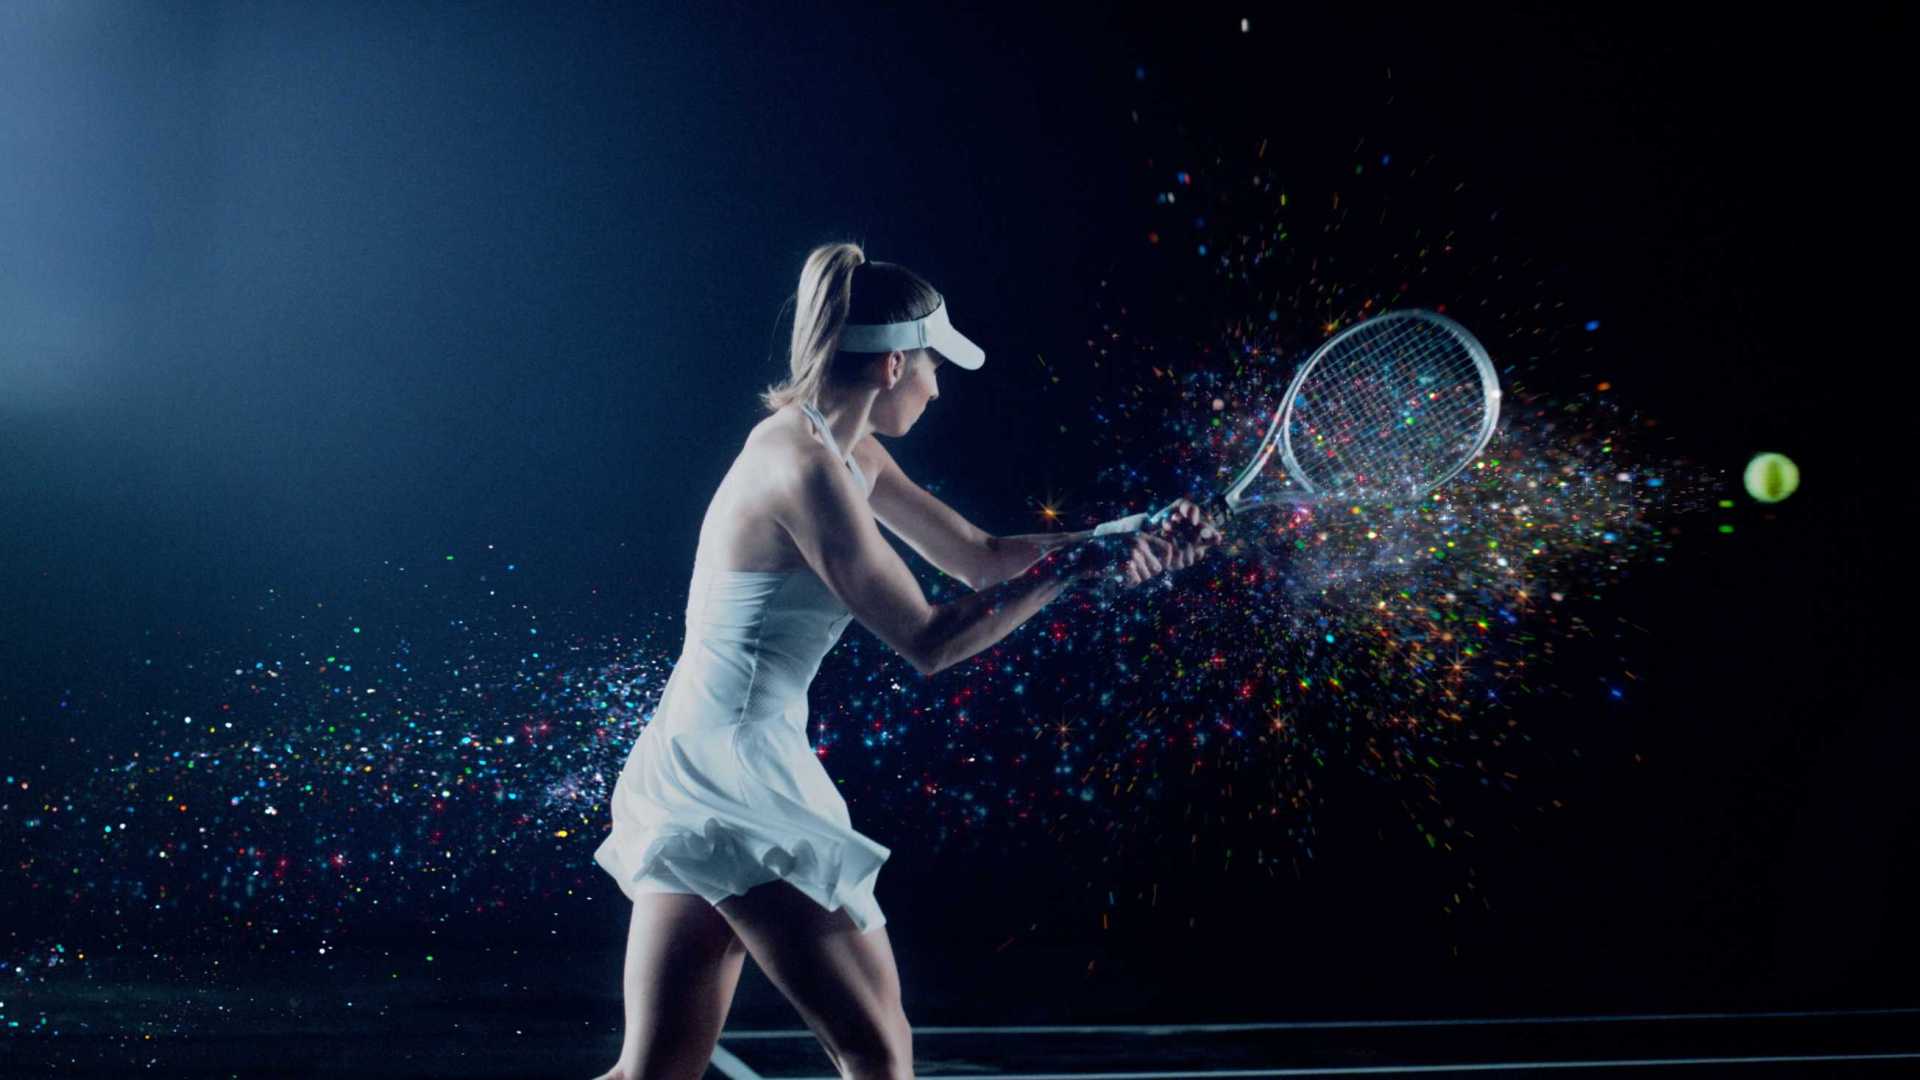 Play With Heart | OPPO x Roland-Garros